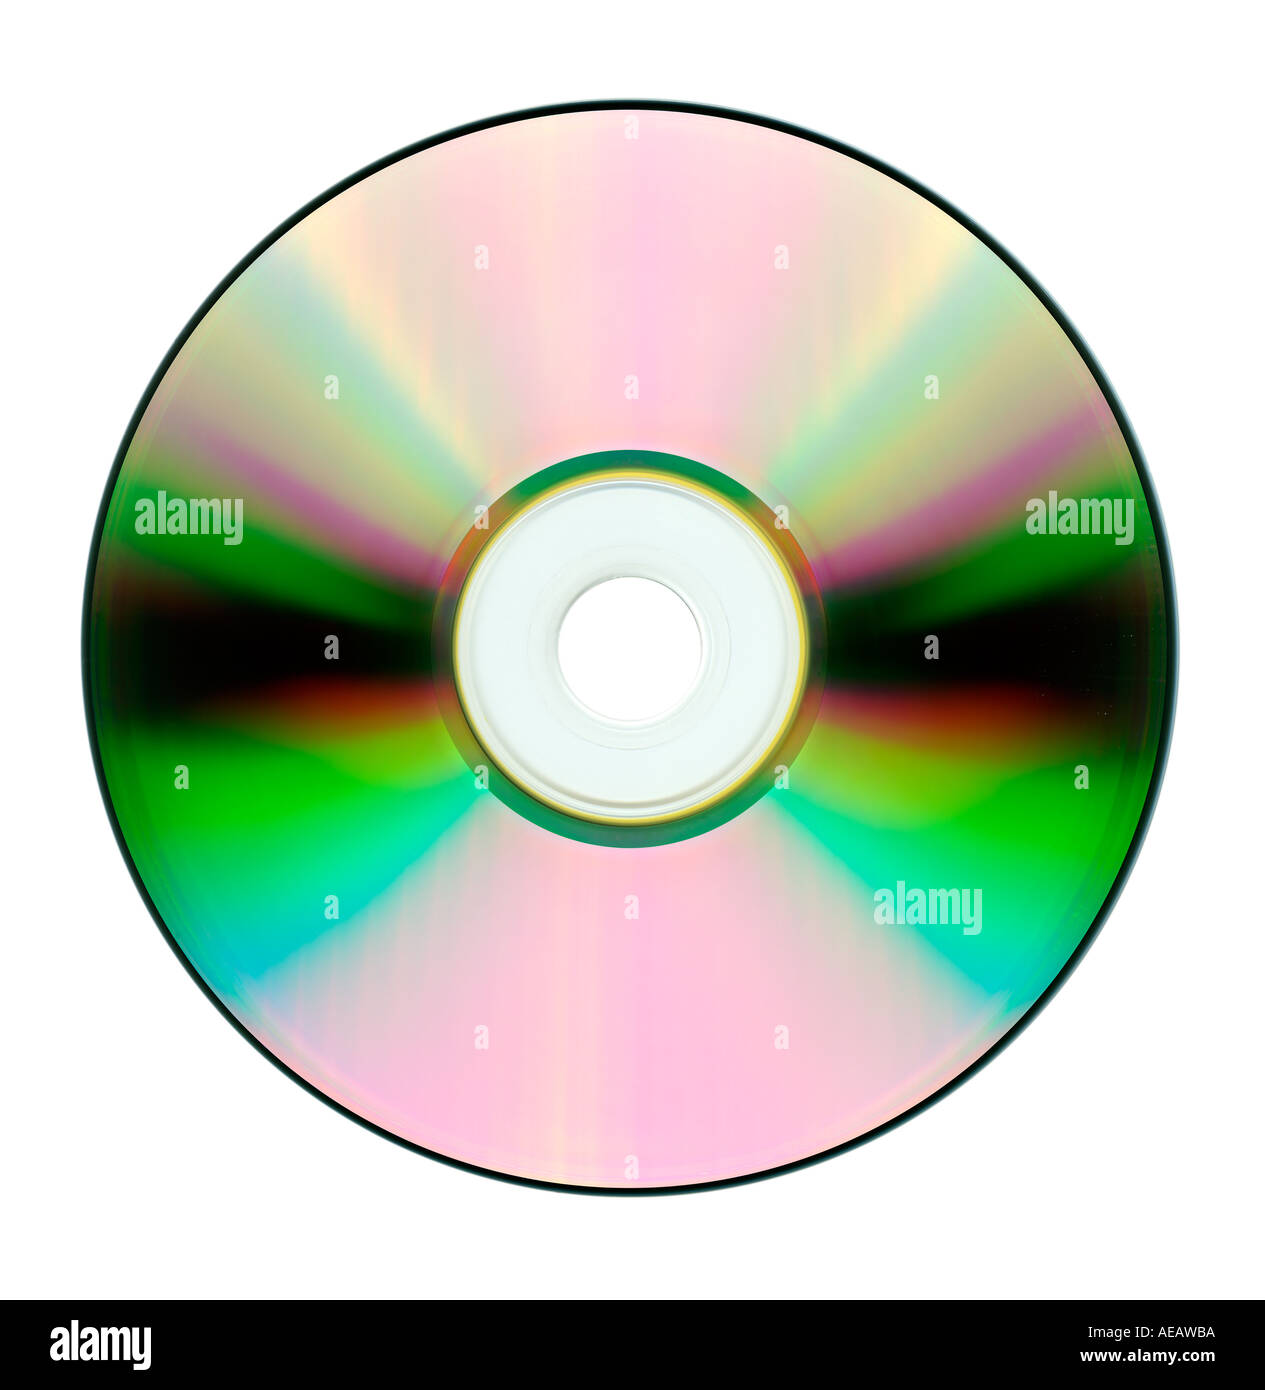 Compact Disk CD Stock Photo